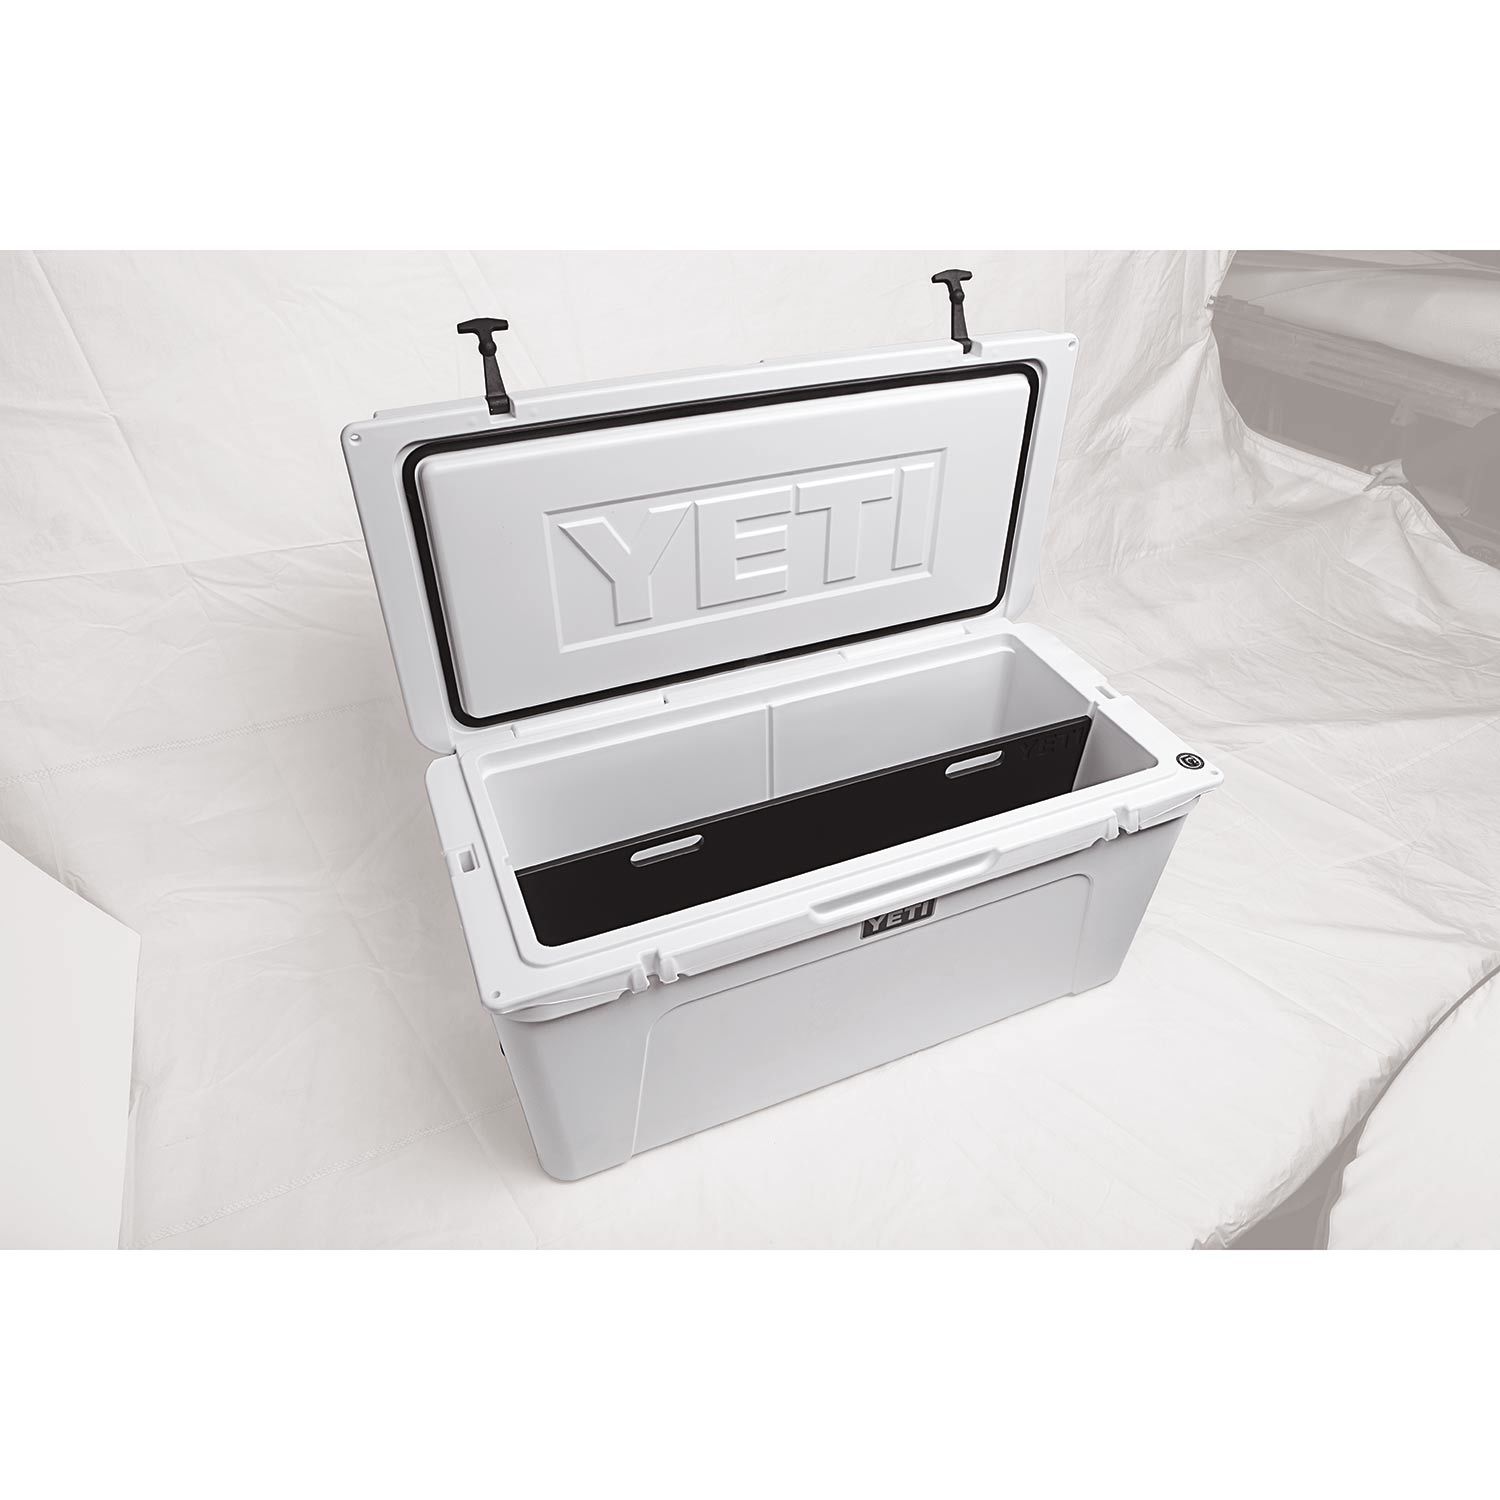  YETI Tundra 65 Cooler Divider - Long Side : Sports